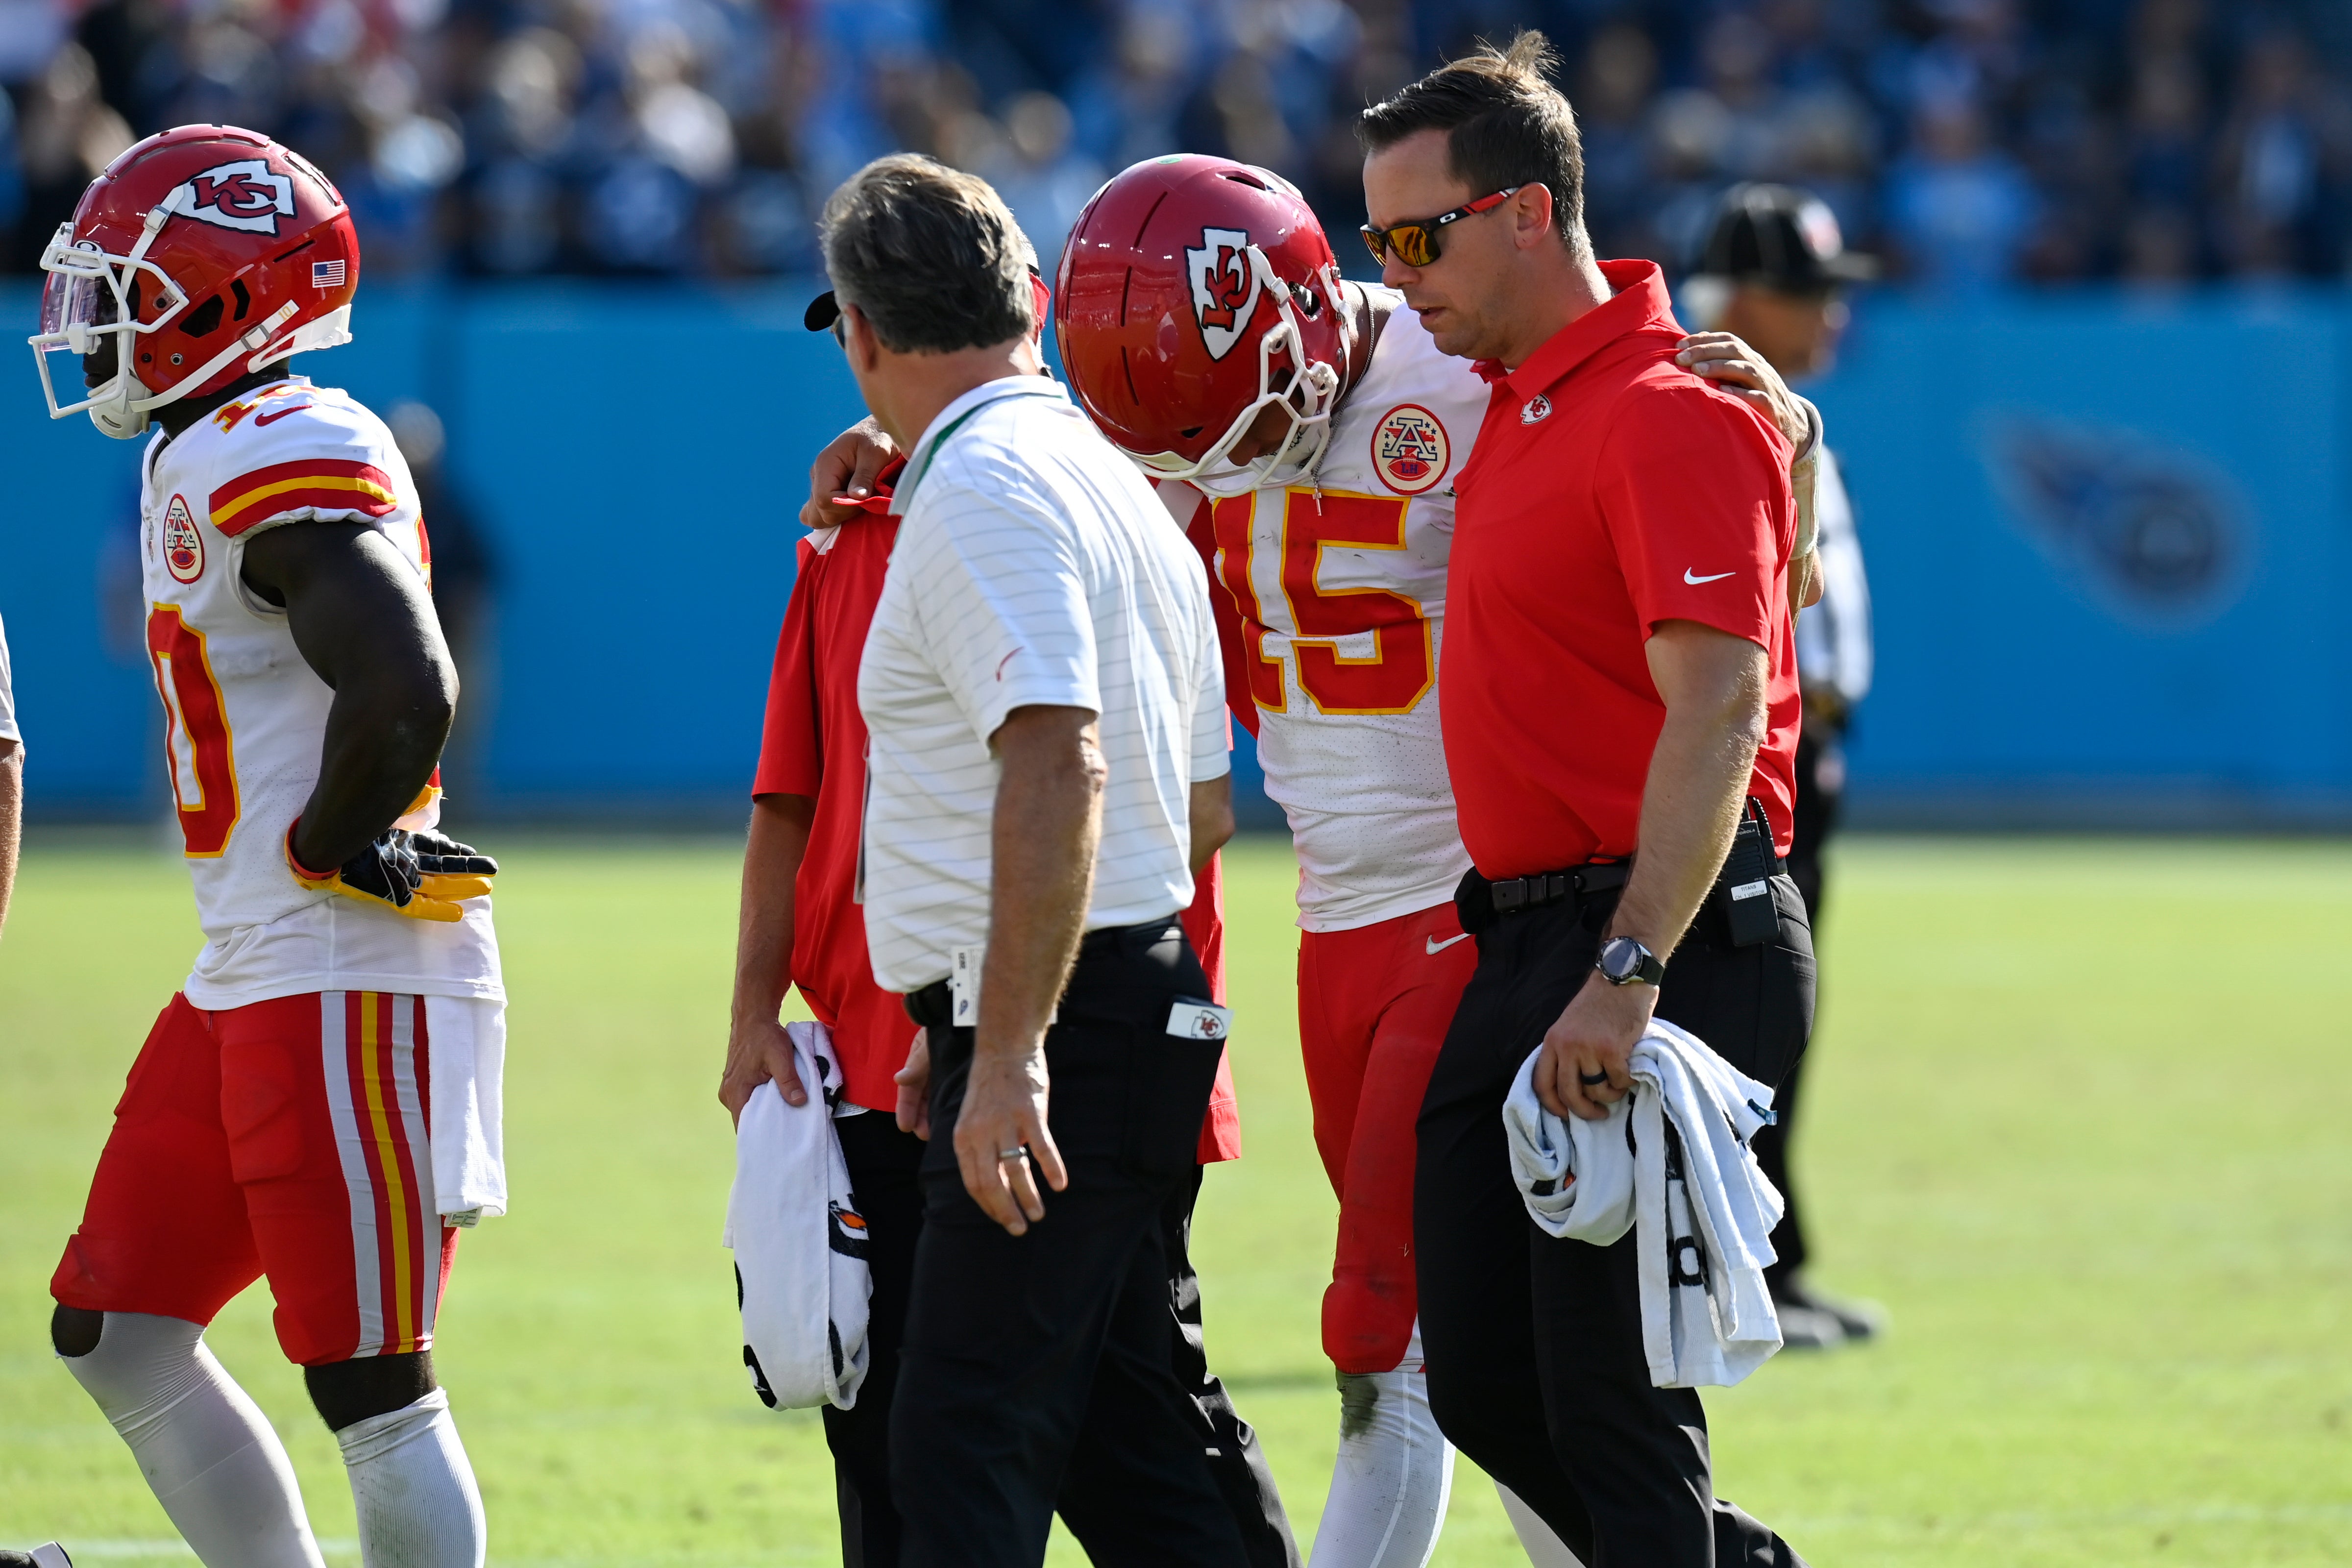 Kansas City Chiefs quarterback Patrick Mahomes (15) is helped off the field after being hit in the head during his side’s defeat to the Tennessee Titans (Mark Zaleski/AP)